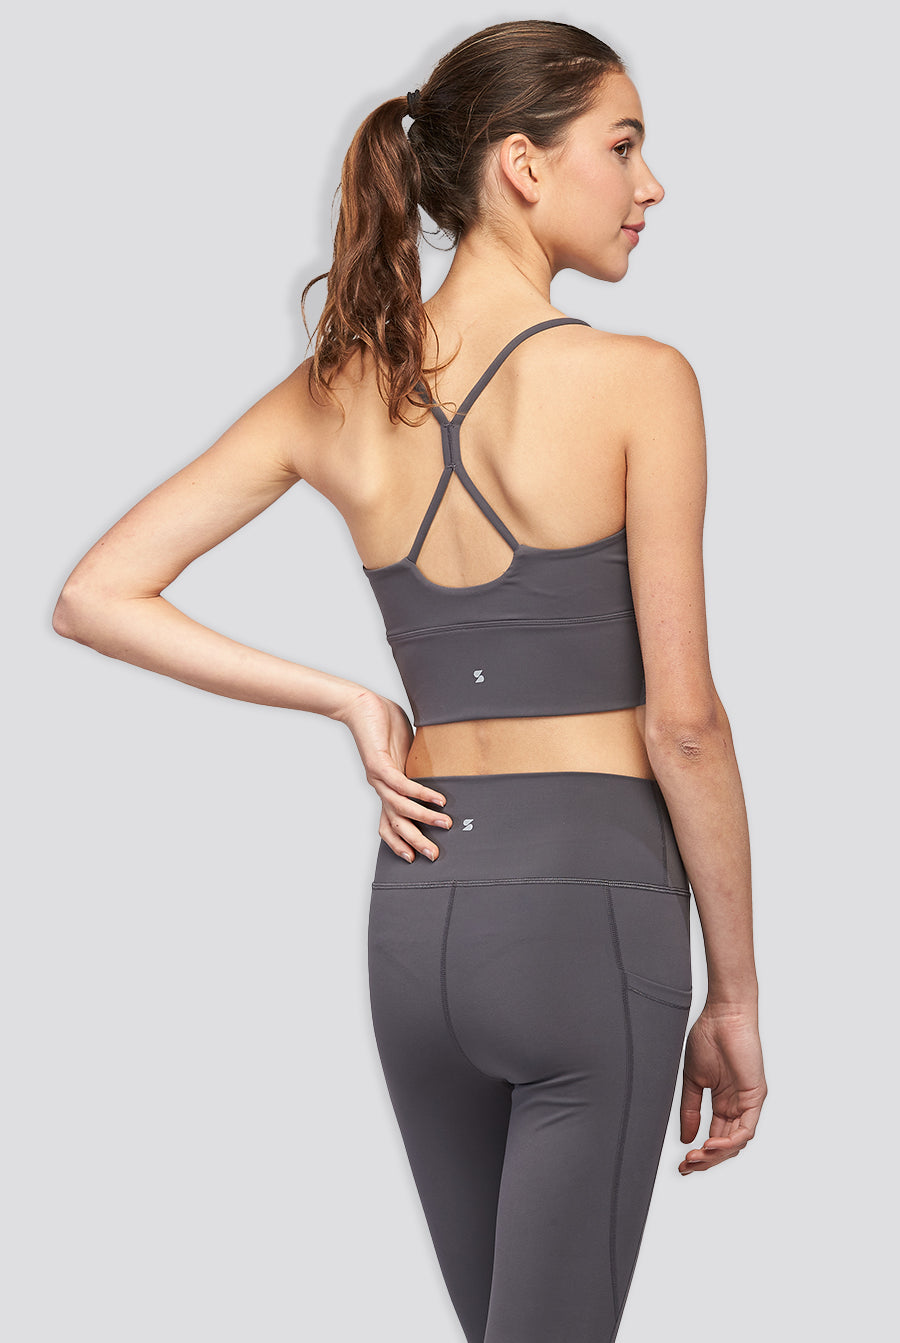 crop top sports bra Charcoal side view